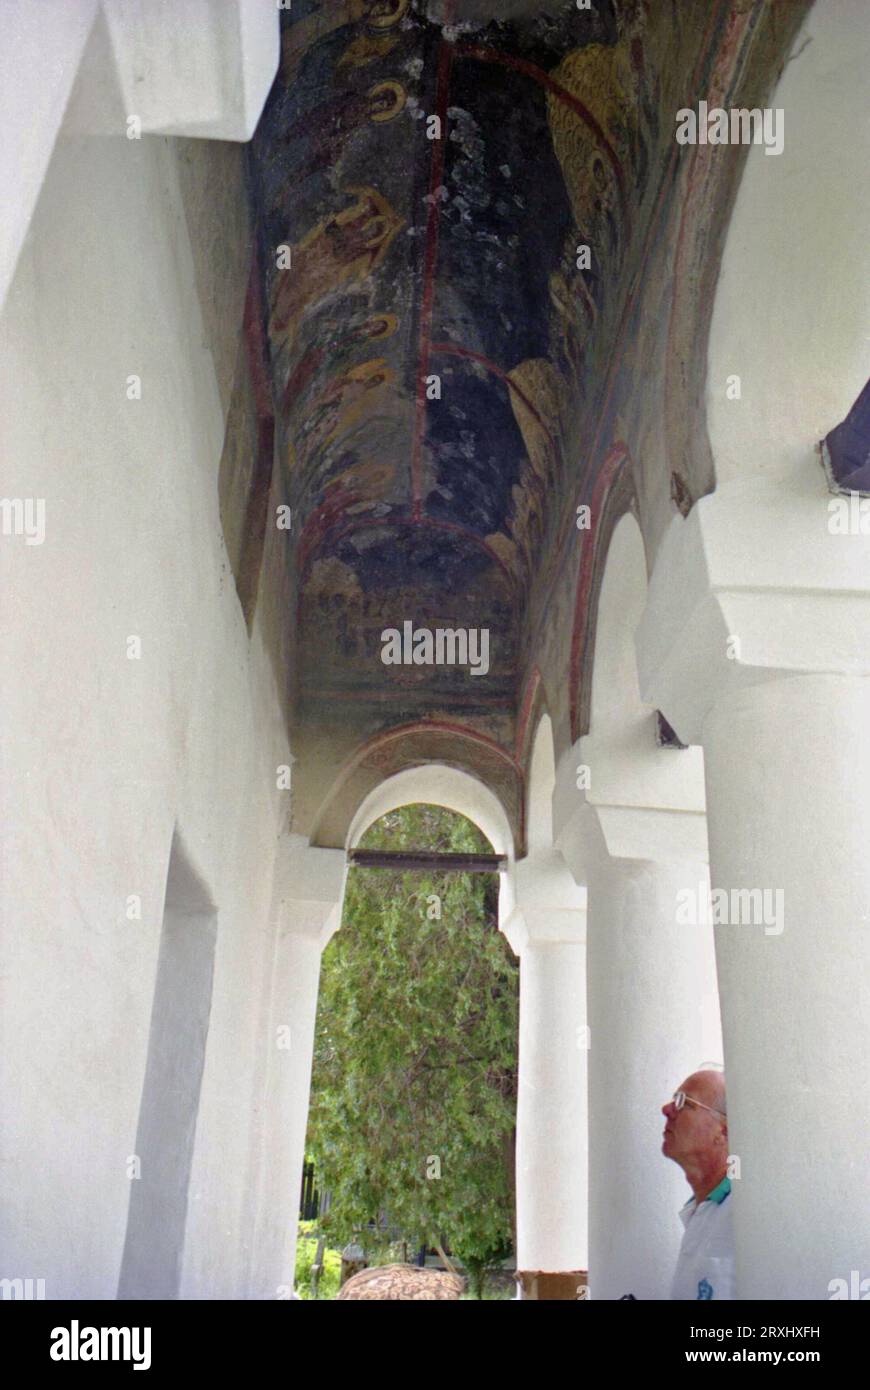 Grecii de Jos, Ialomita County, Romania, approx. 2000. Exterior view of Saint Mary Christian Orthodox church, a historical monument from the 18th century. Fresco on the ceiling of the front porch. Stock Photo